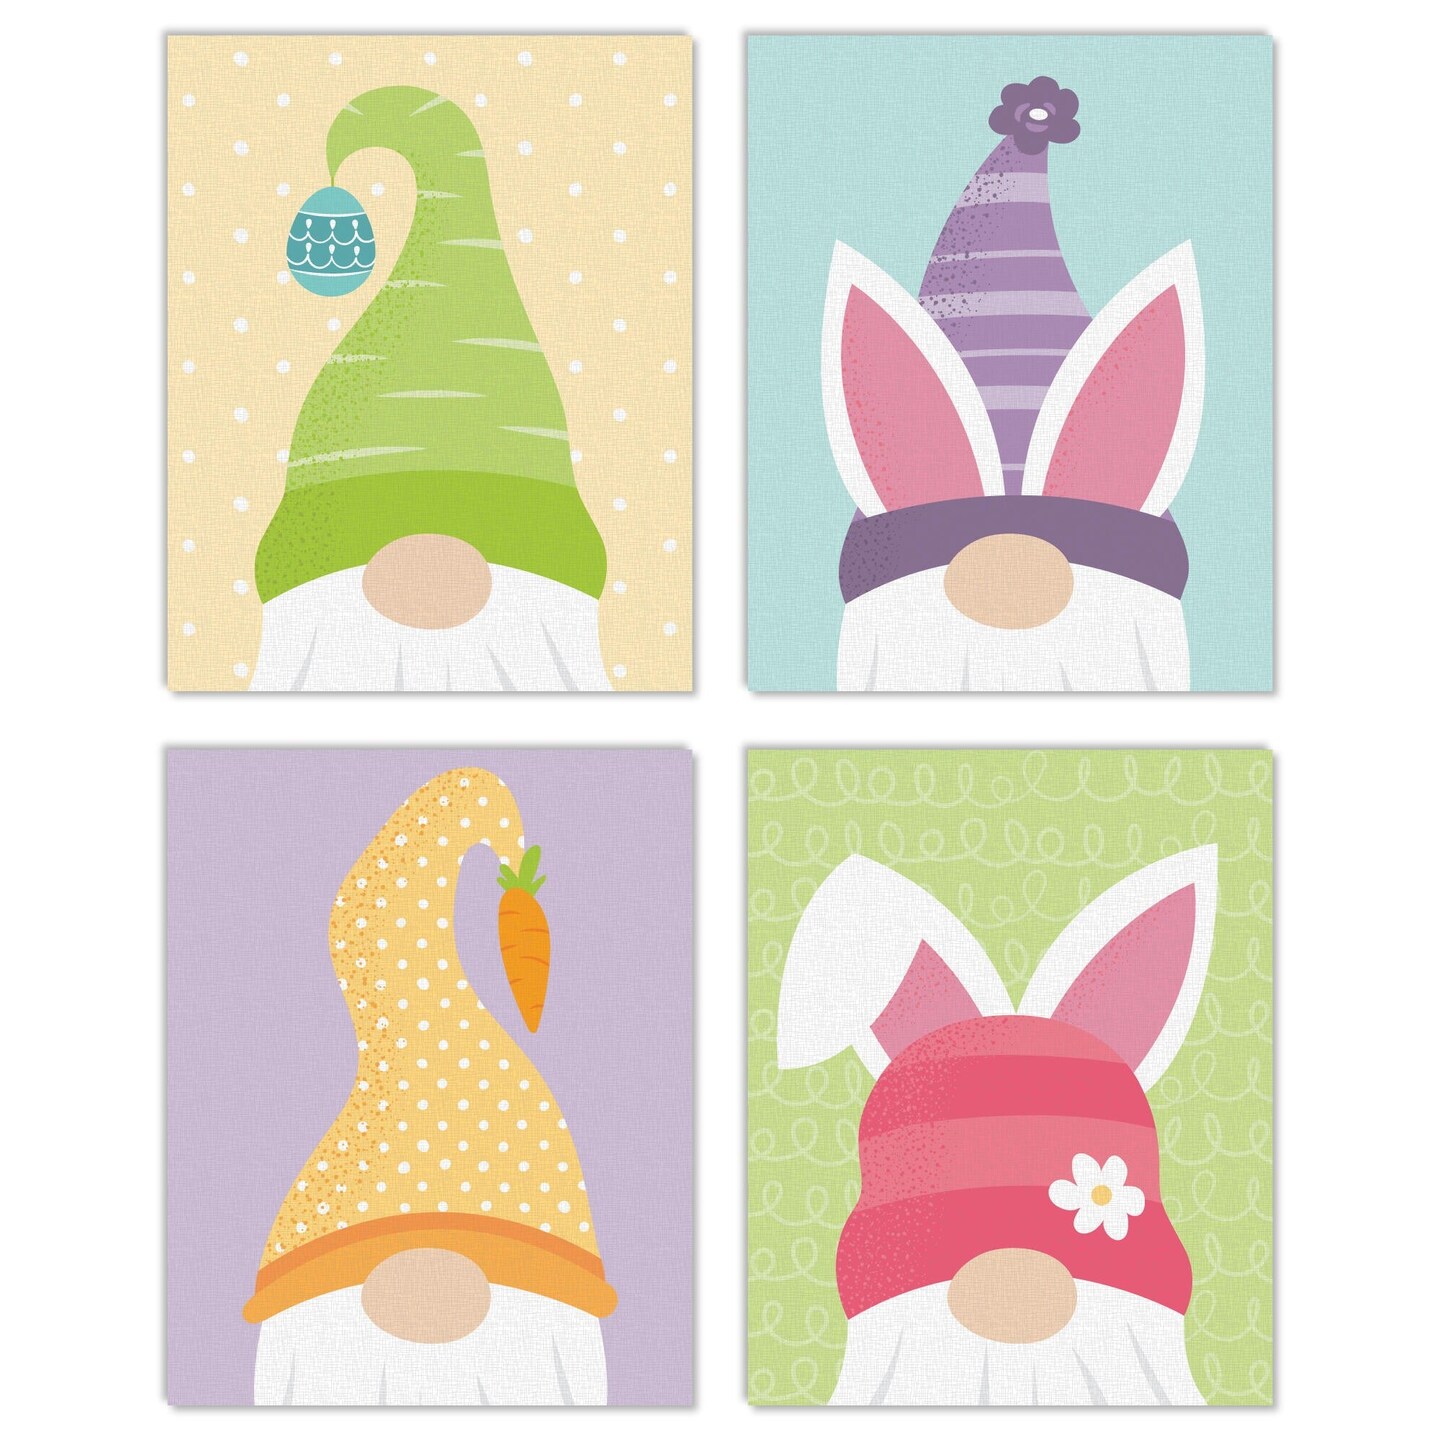 Big Dot of Happiness Easter Gnomes - Unframed Spring Bunny Linen Paper Wall Art - Set of 4 - Artisms - 8 x 10 inches